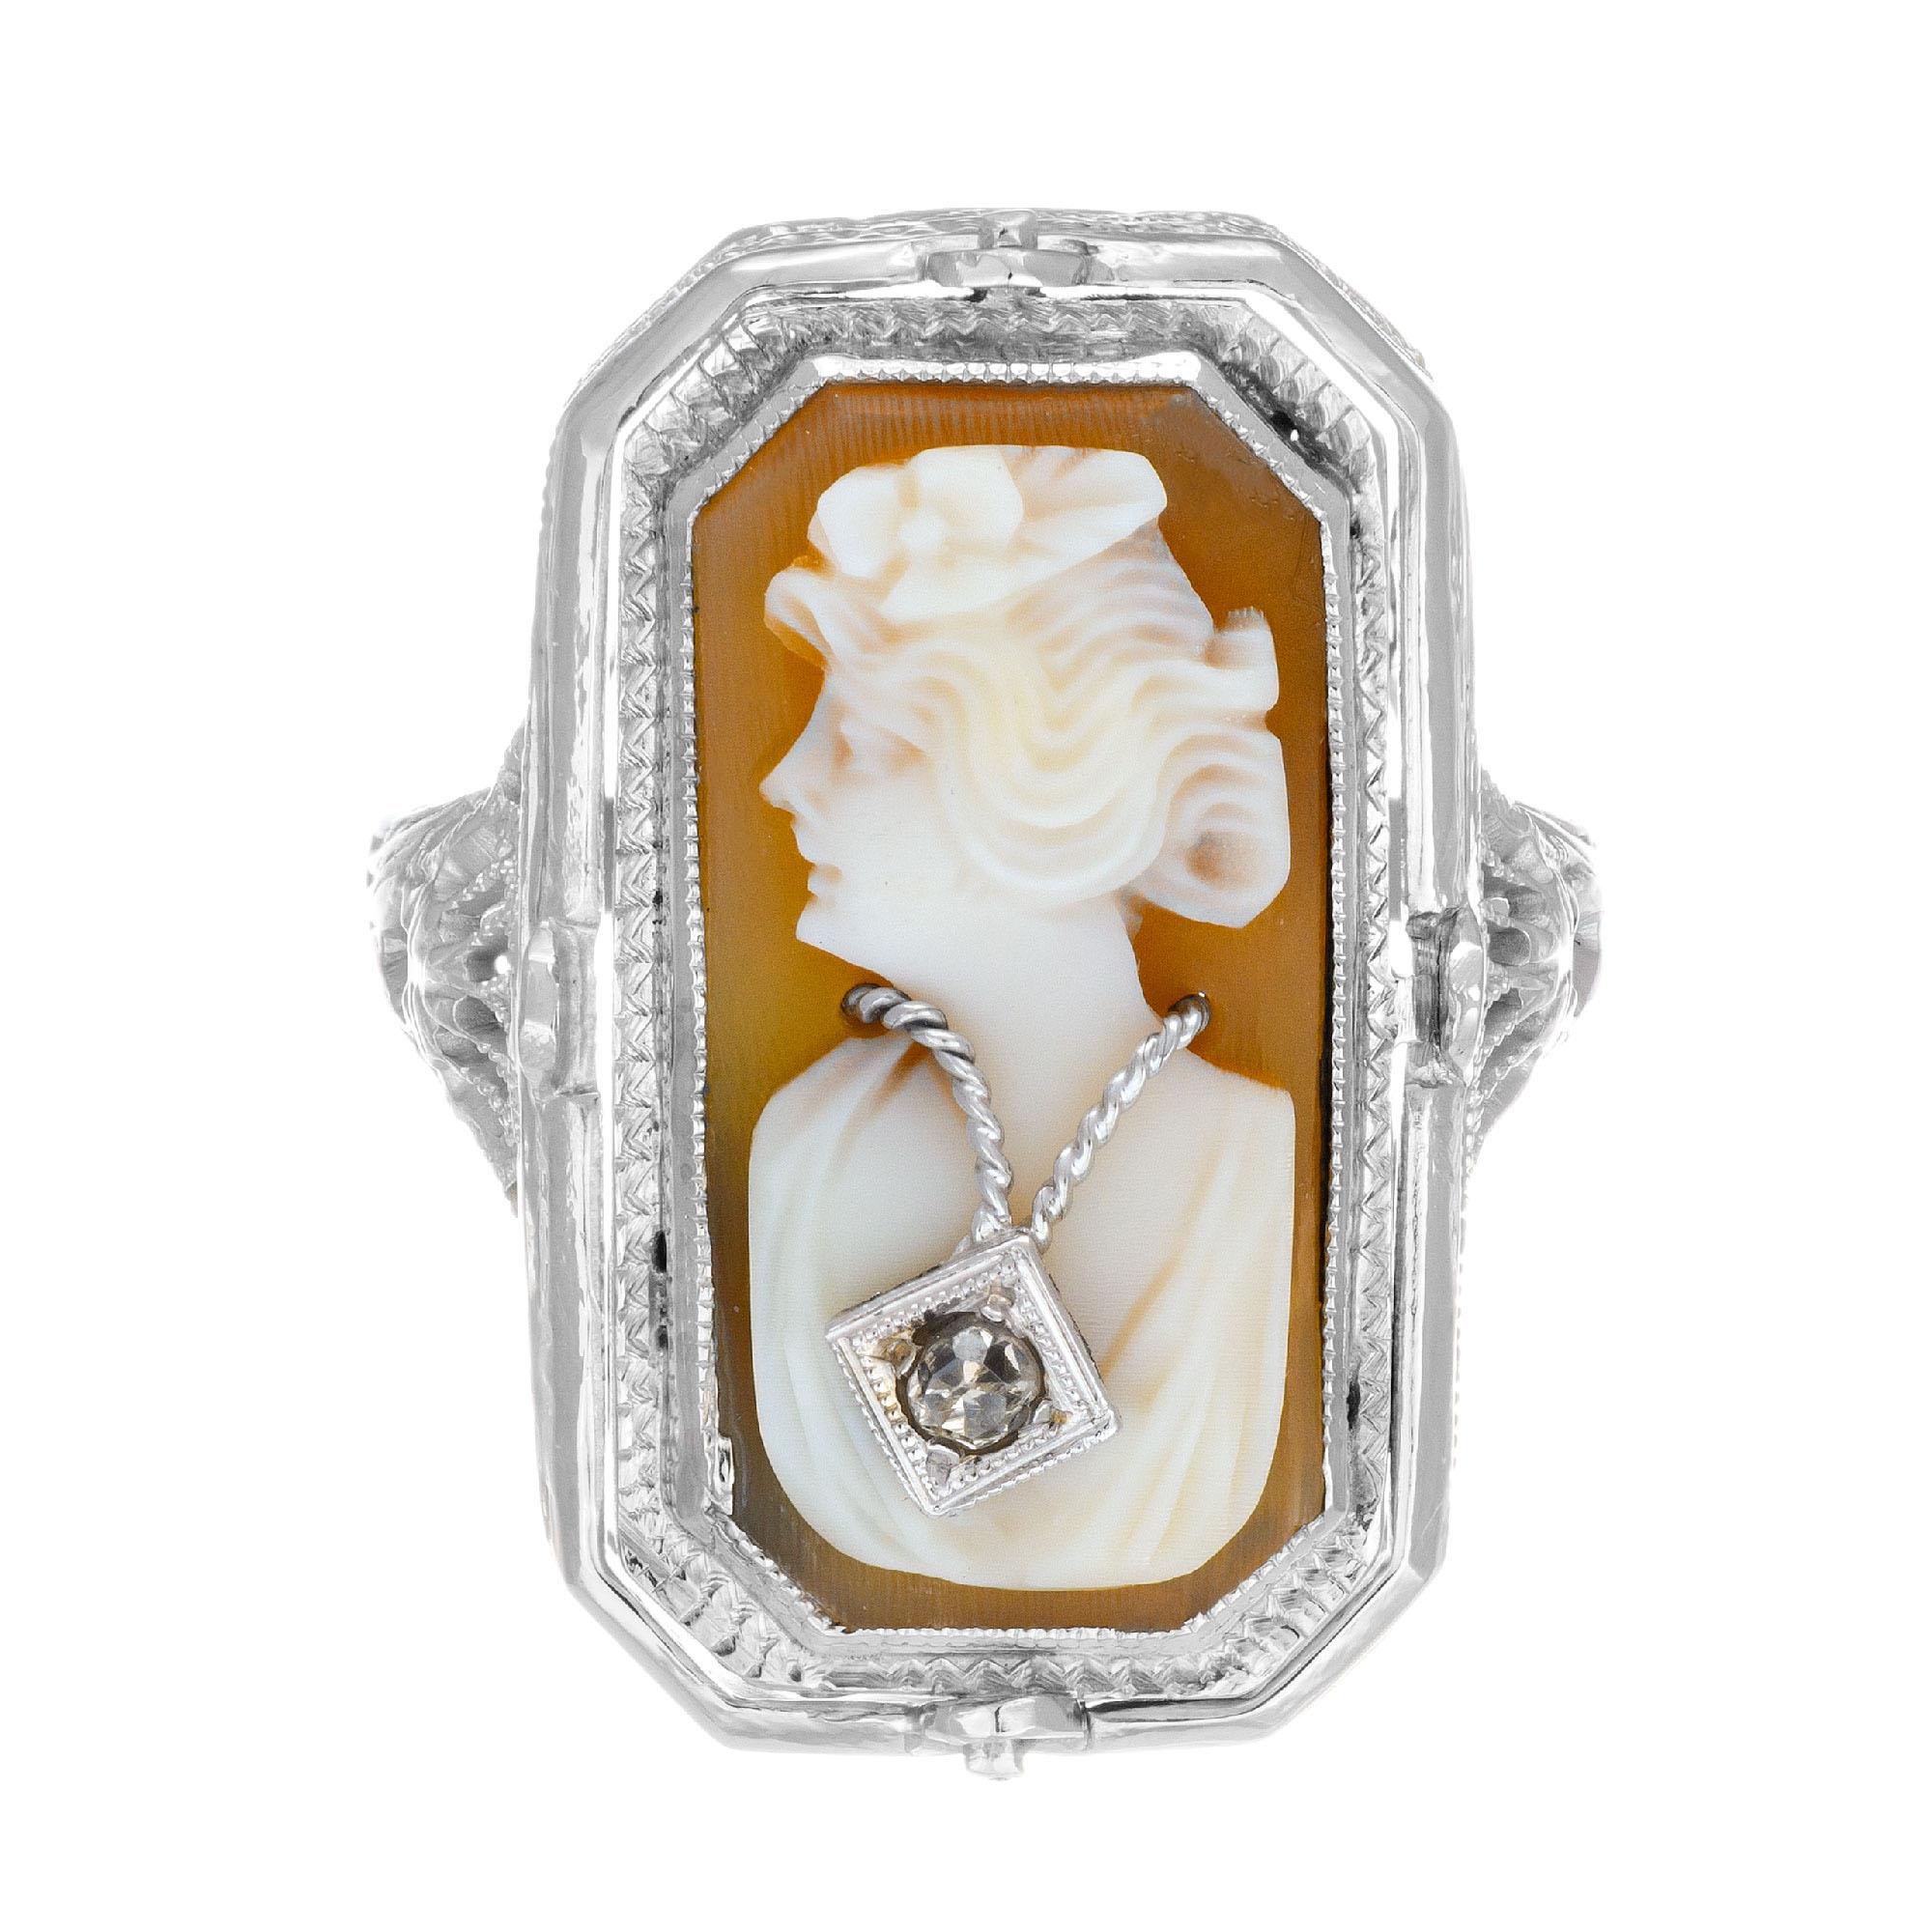 1930’s diamond, onyx and cameo flip ring. Onyx and round diamond on one side which can be flipped to show a cameo with one round accent diamond. 14k white gold filigree flip ring.

2 single cut diamonds, I SI approx. .4cts
Size 6.5 and sizable
1